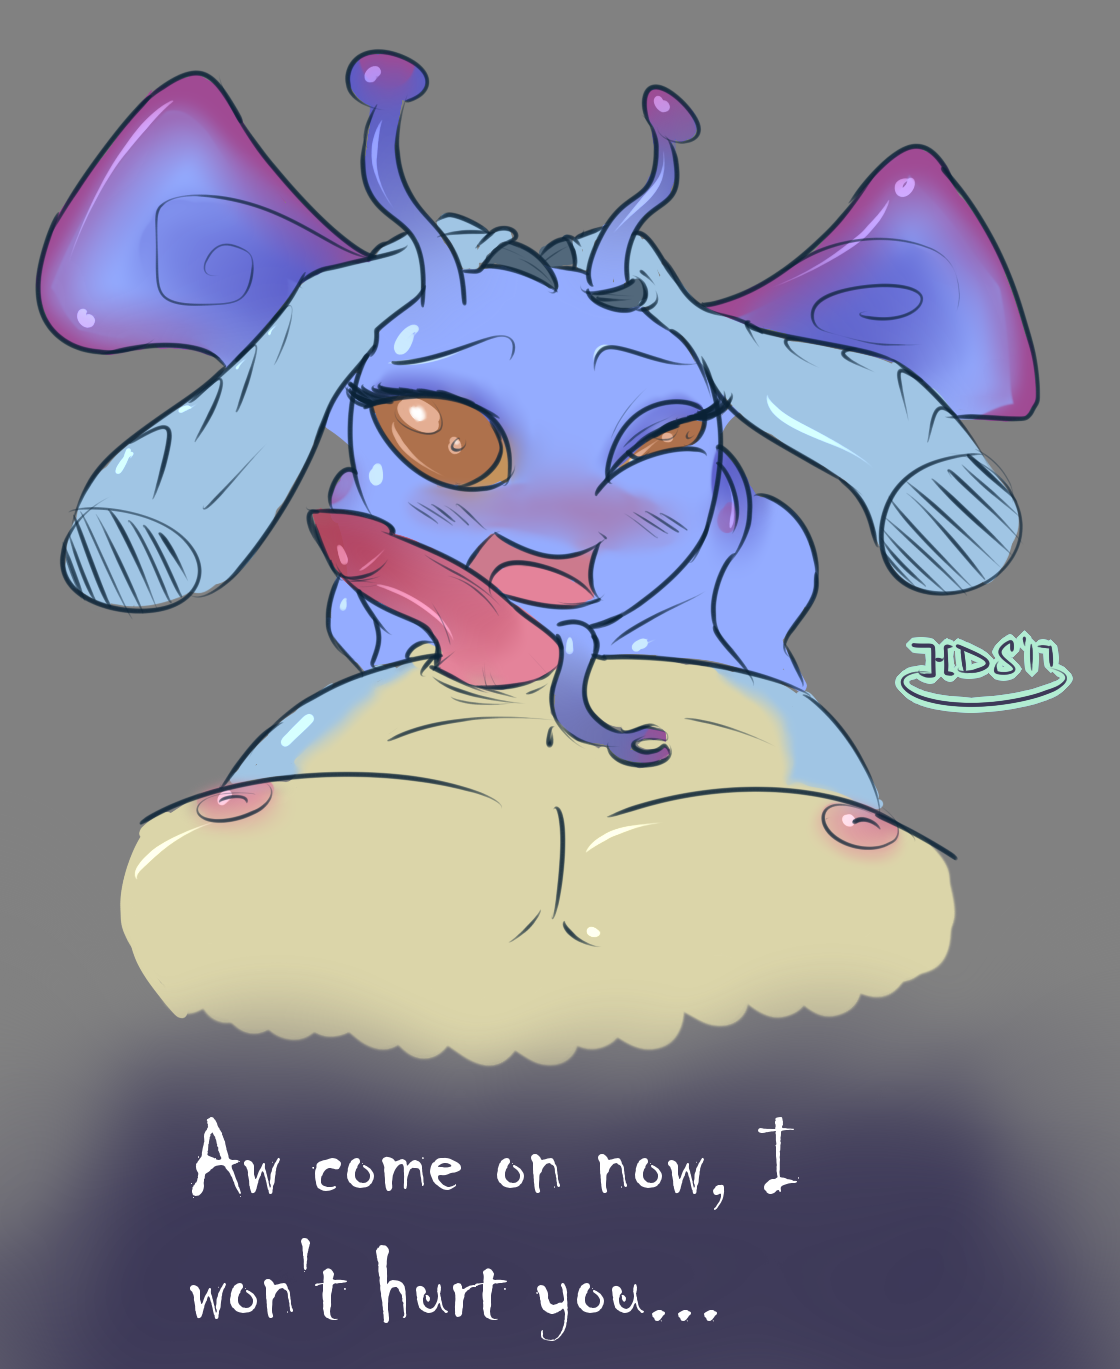 Anon requested I keep going with my Slark x Puck drawing, so here’s some more of